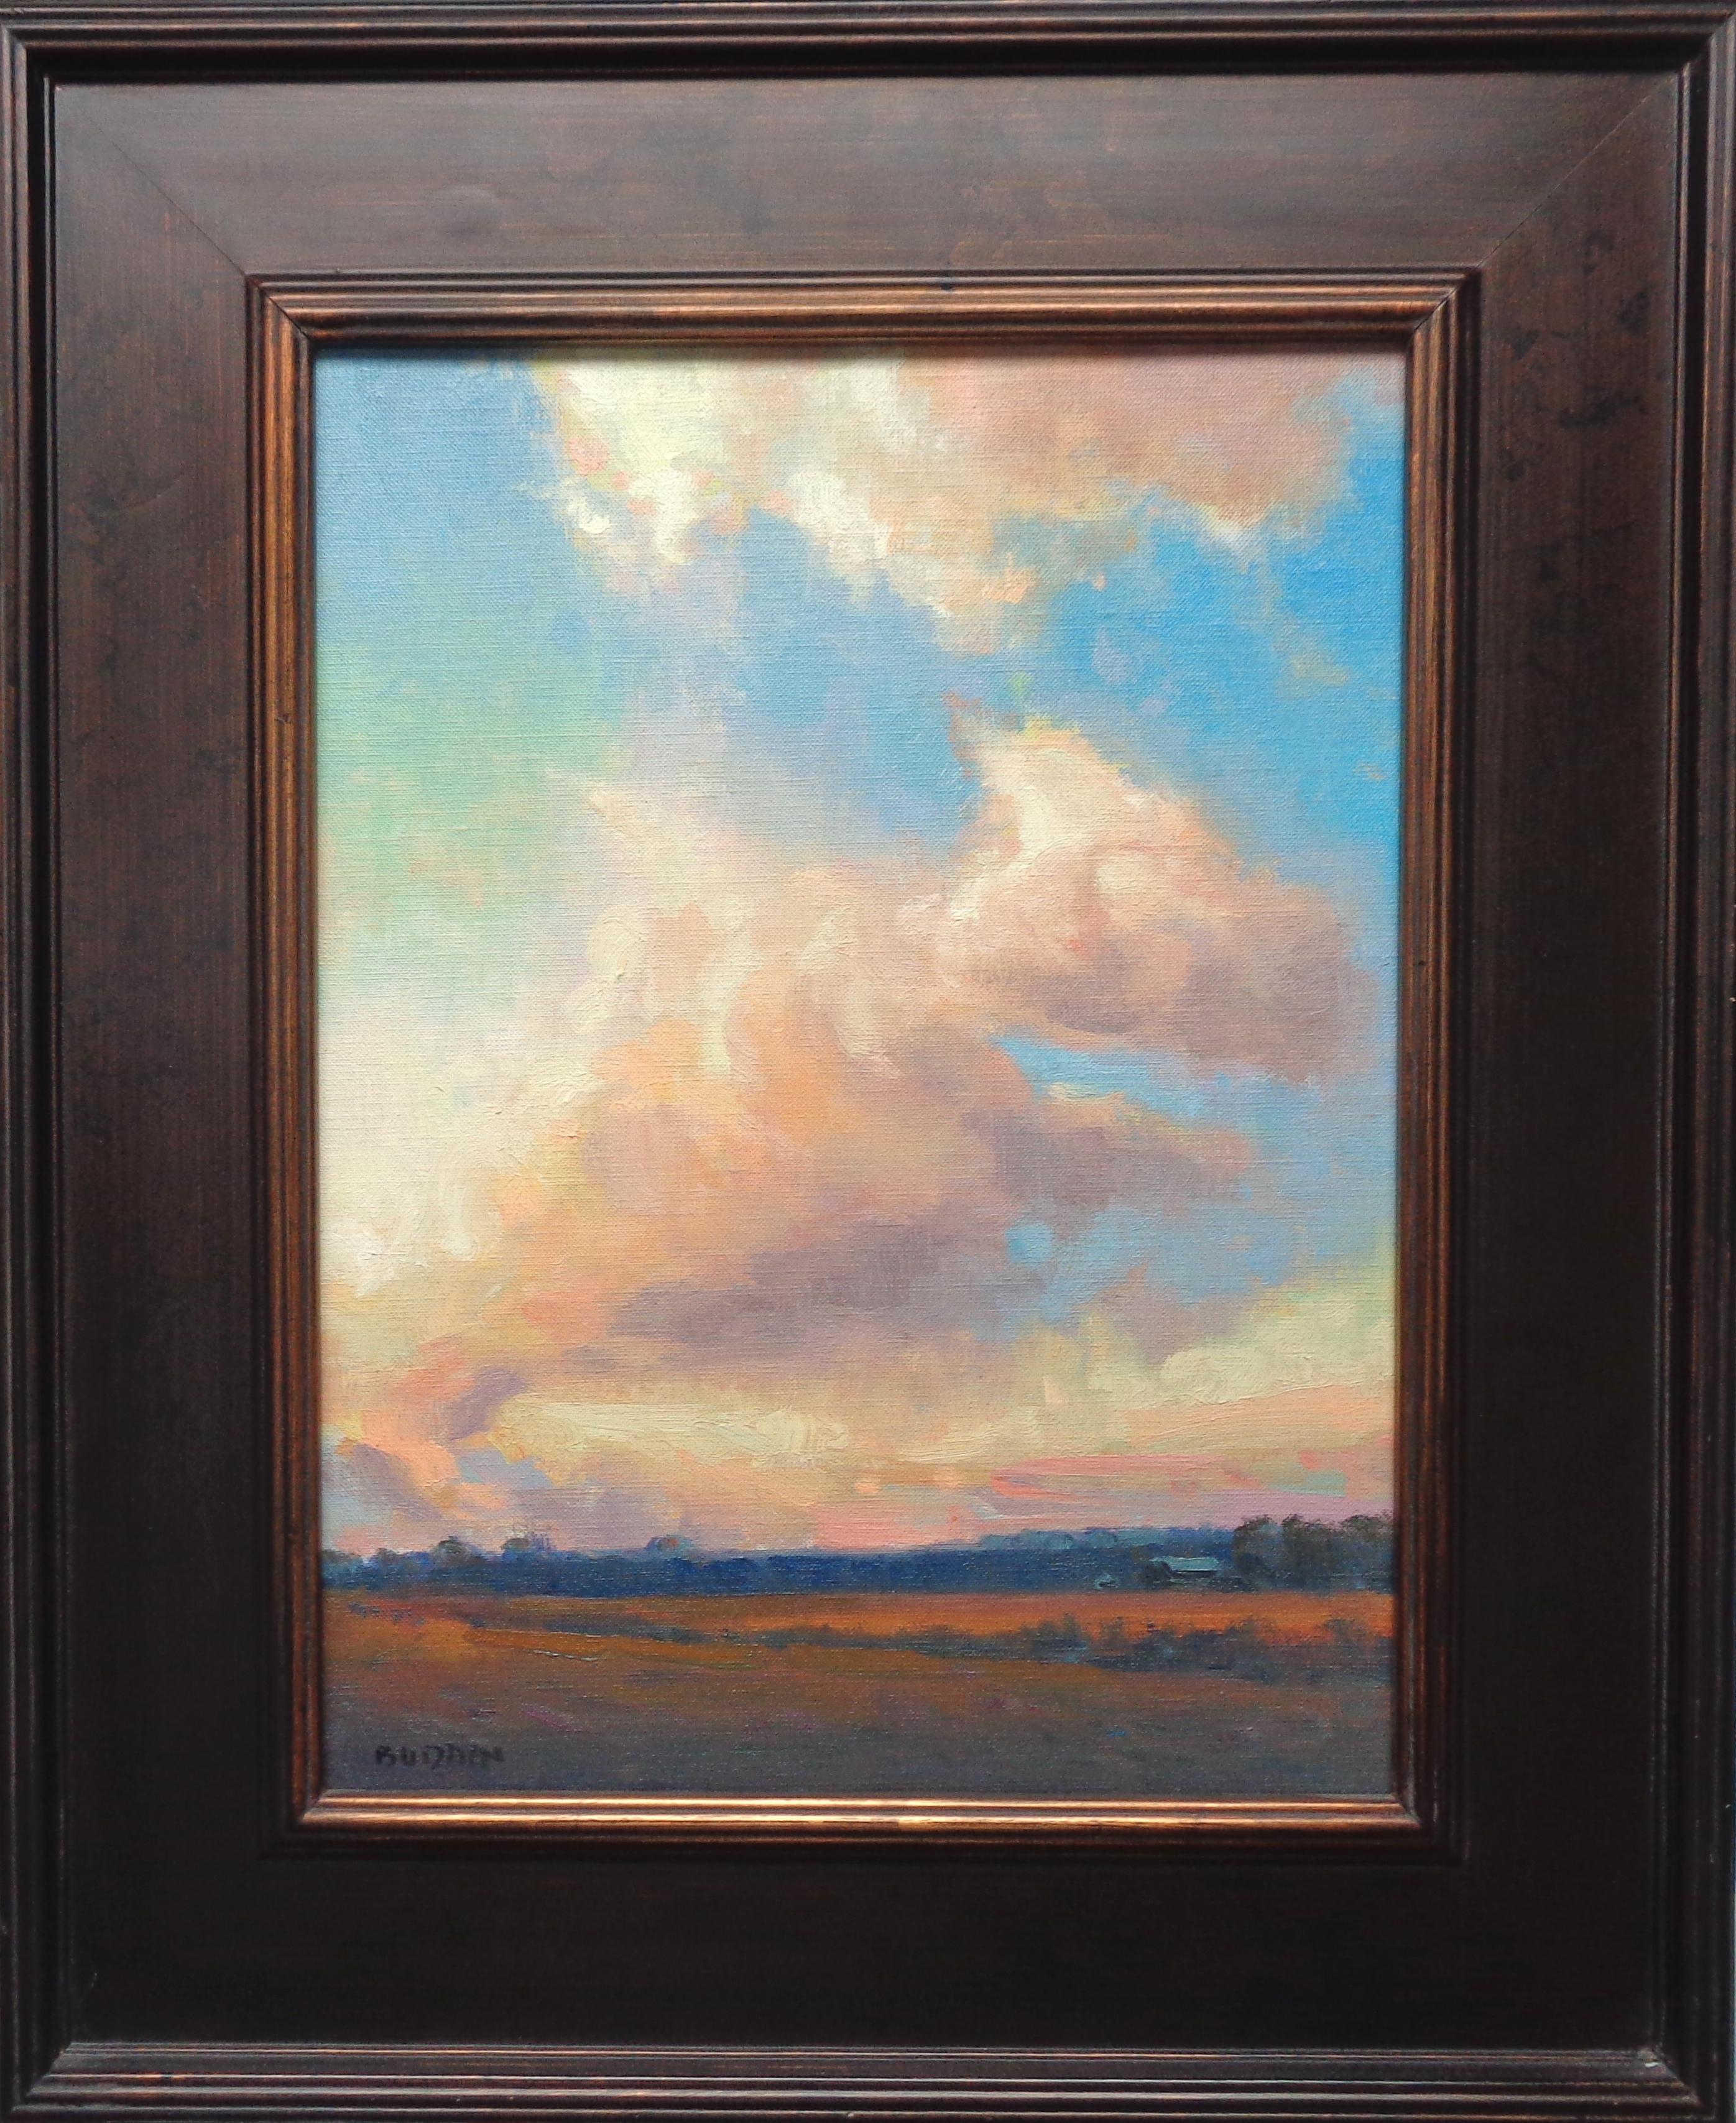 An oil painting on canvas by award winning contemporary artist Michael Budden that showcases a unique composition of a beautiful sunset sky filled with creamy clouds created in an impressionistic realism style. The painting exudes the very rich